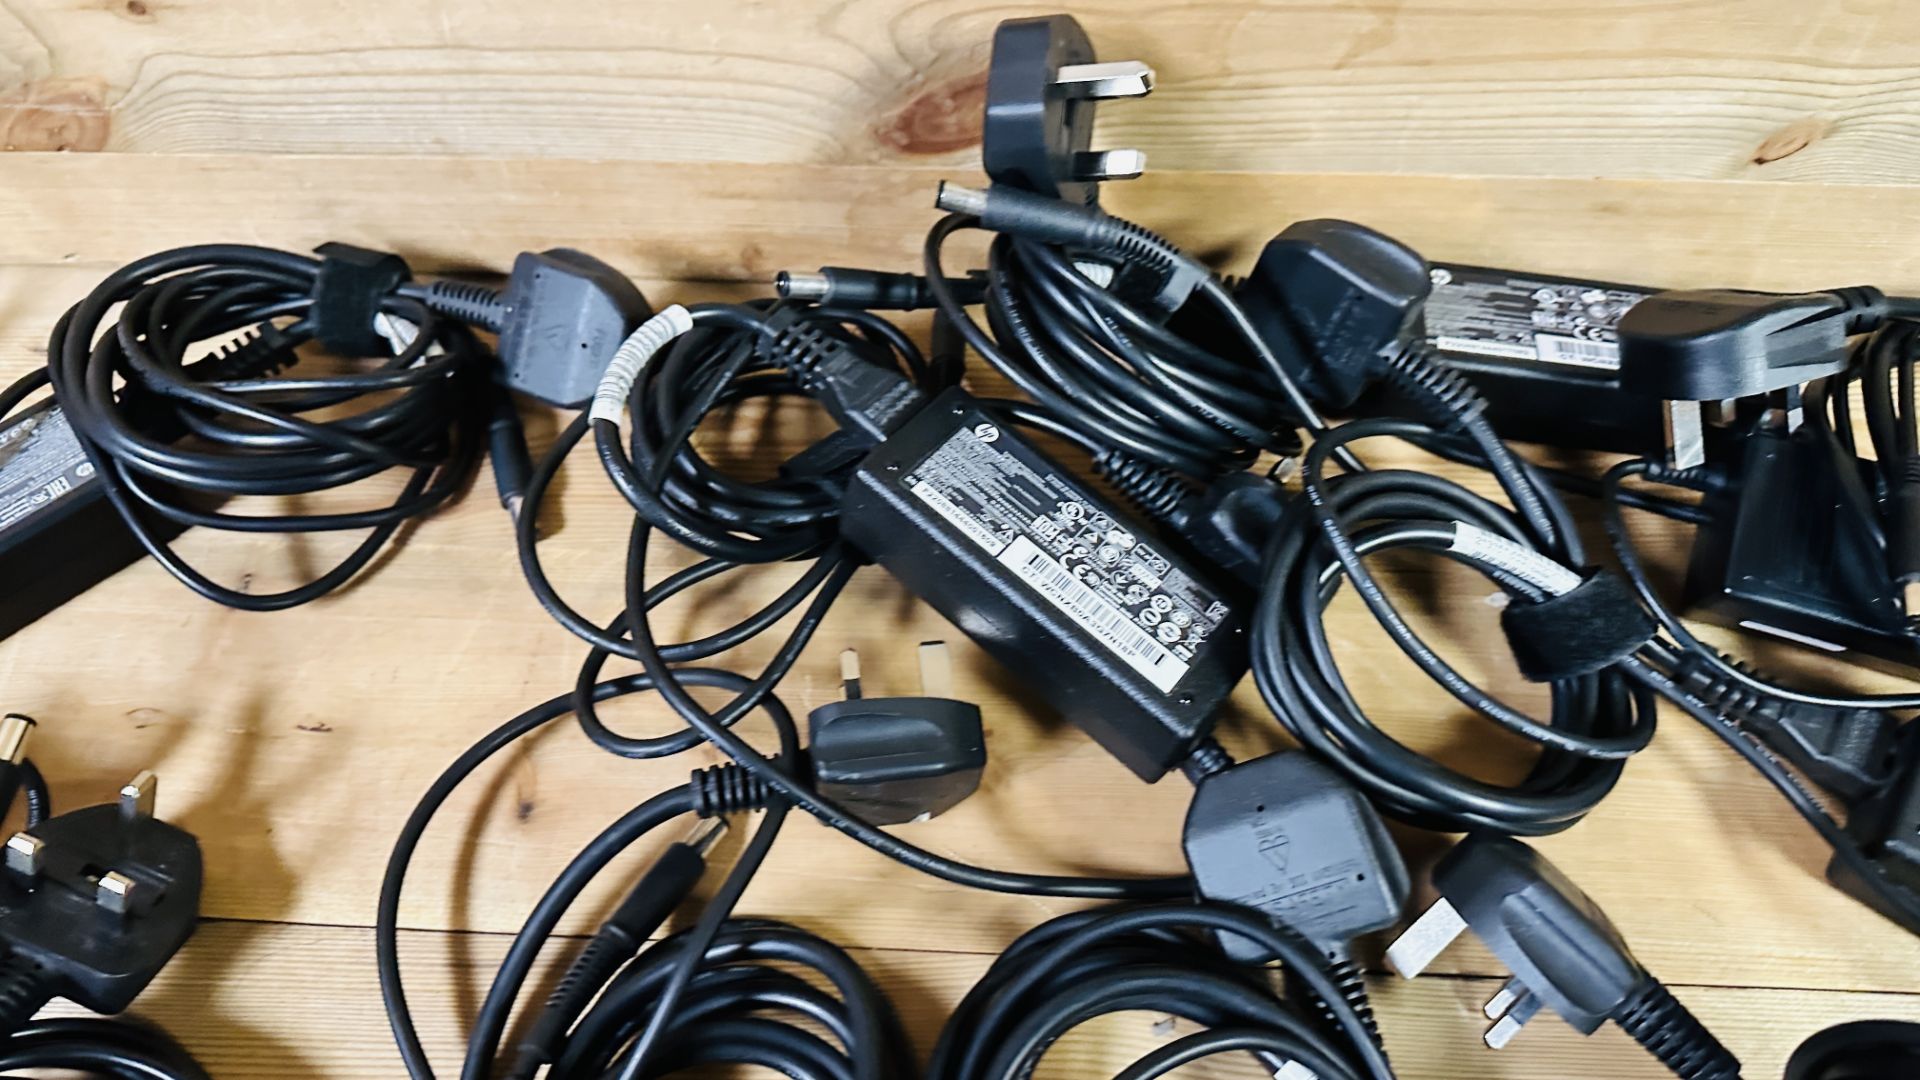 16 X LAPTOP CHARGERS FOR HP LAPTOPS, MANY HP 65W EXAMPLES - SOLD AS SEEN. - Image 9 of 10